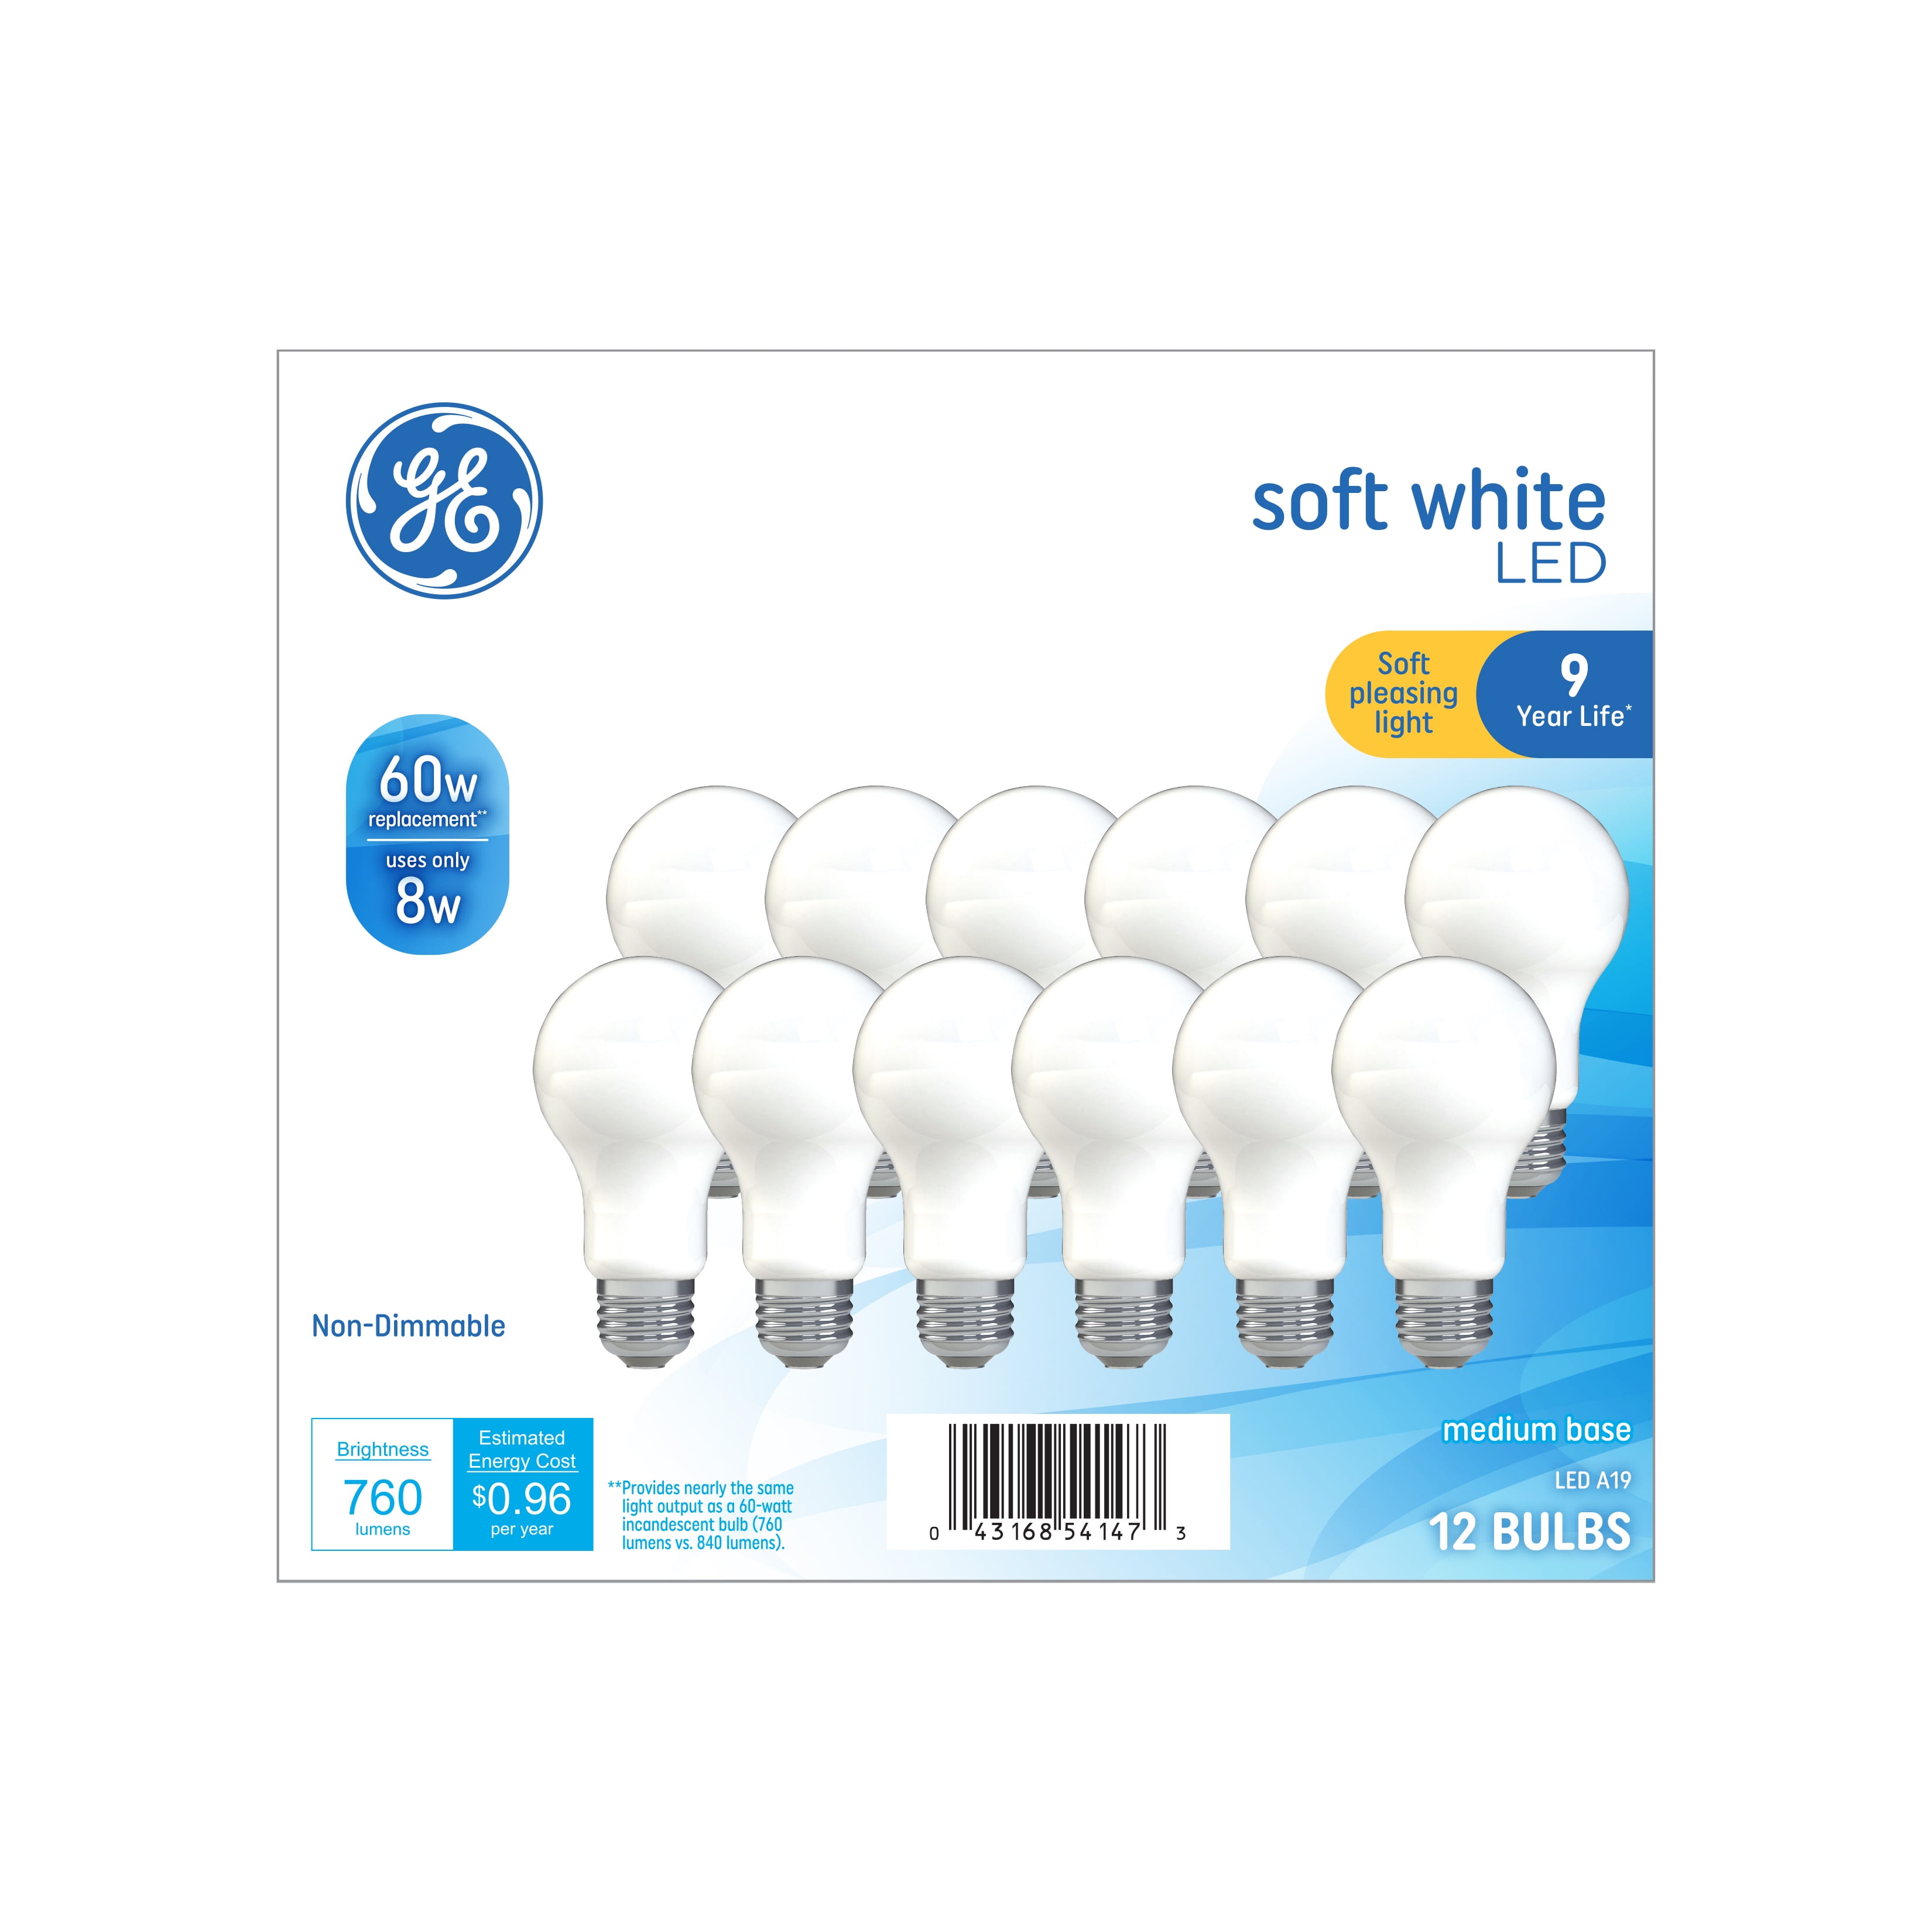 GE LED A19 9W Equiv Long Life Non-dimmable Soft White Light Bulbs 60W 8-PK 8 